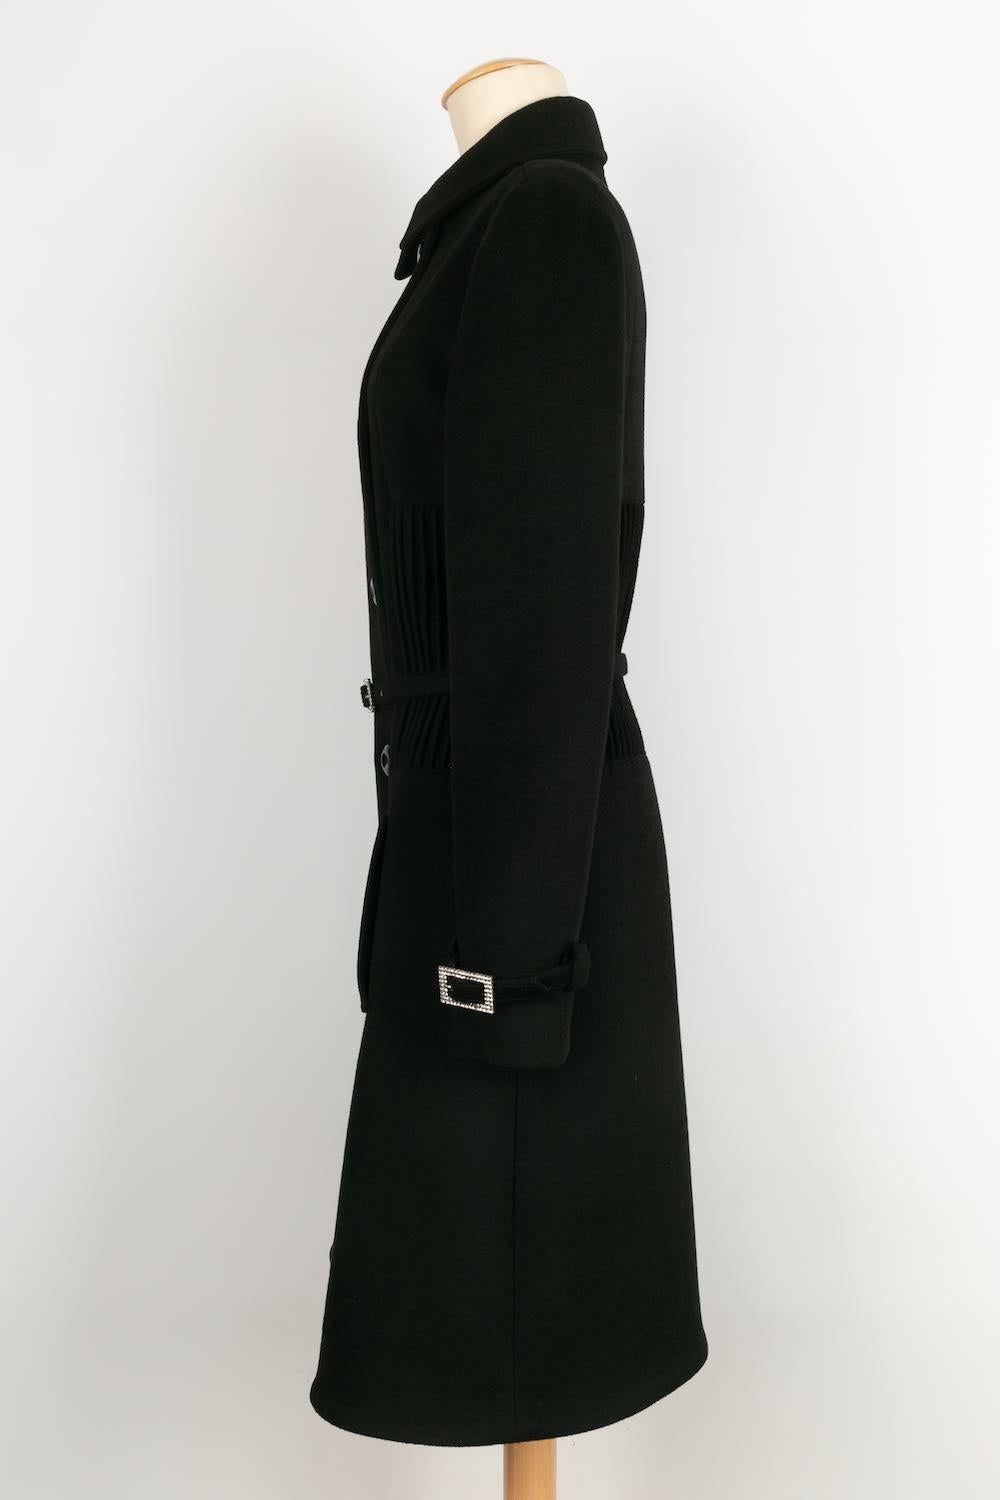 Dior -(Made in Italy) Black cashmere coat. Size 40FR. Winter 2007 collection.

Additional information: 
Dimensions: Shoulder width: 41 cm, Chest: 42 cm, Sleeve length: 65 cm, Length: 107 cm
Condition: Very good condition
Seller Ref number: M16